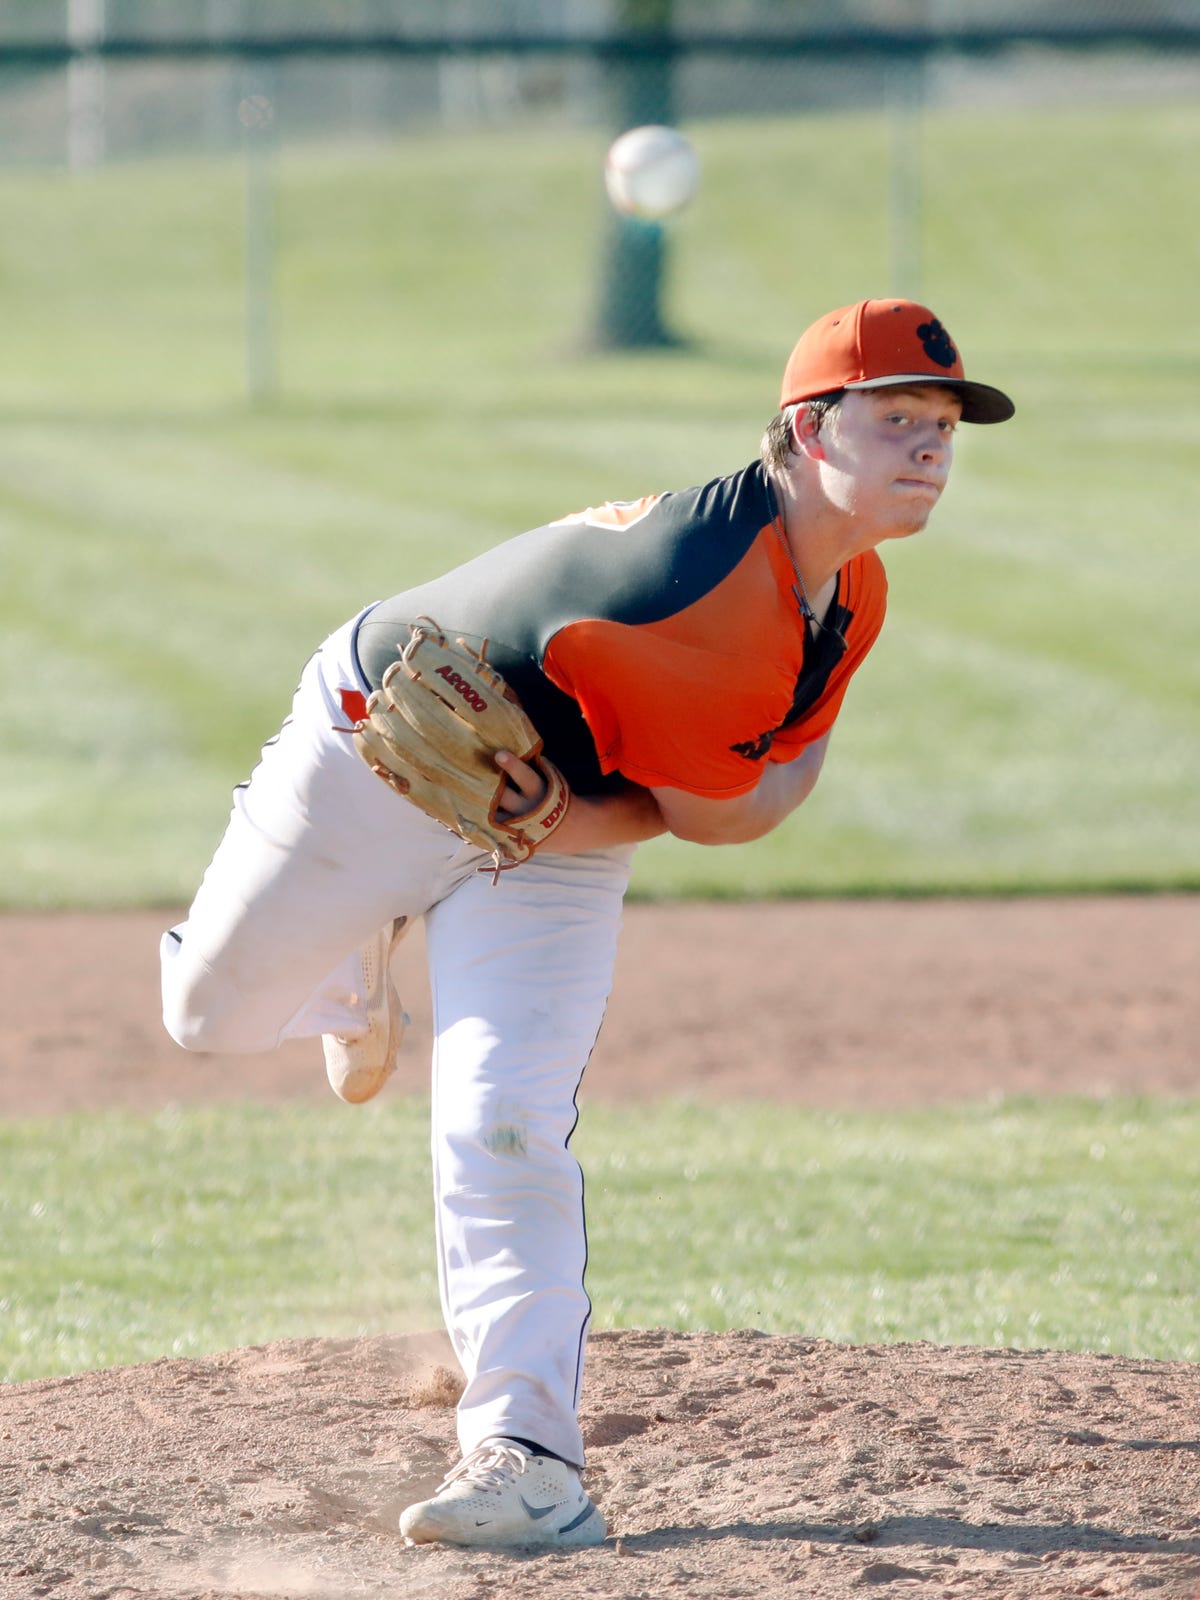 Exciting Tight Race Expected in Muskingum Valley League Small School Baseball Division